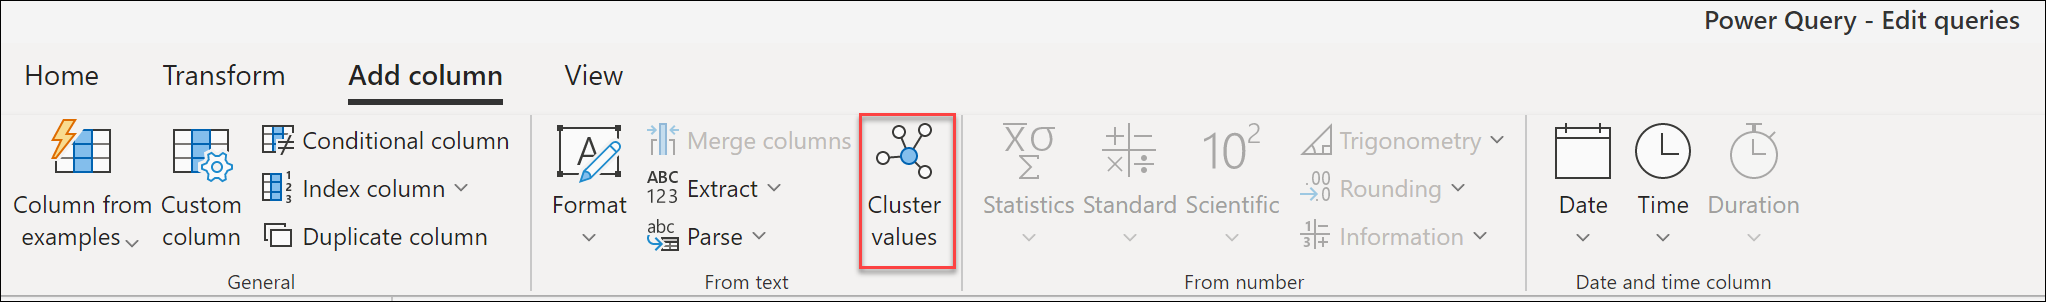 Cluster values icon inside the Add column tab in the Power Query online ribbon.